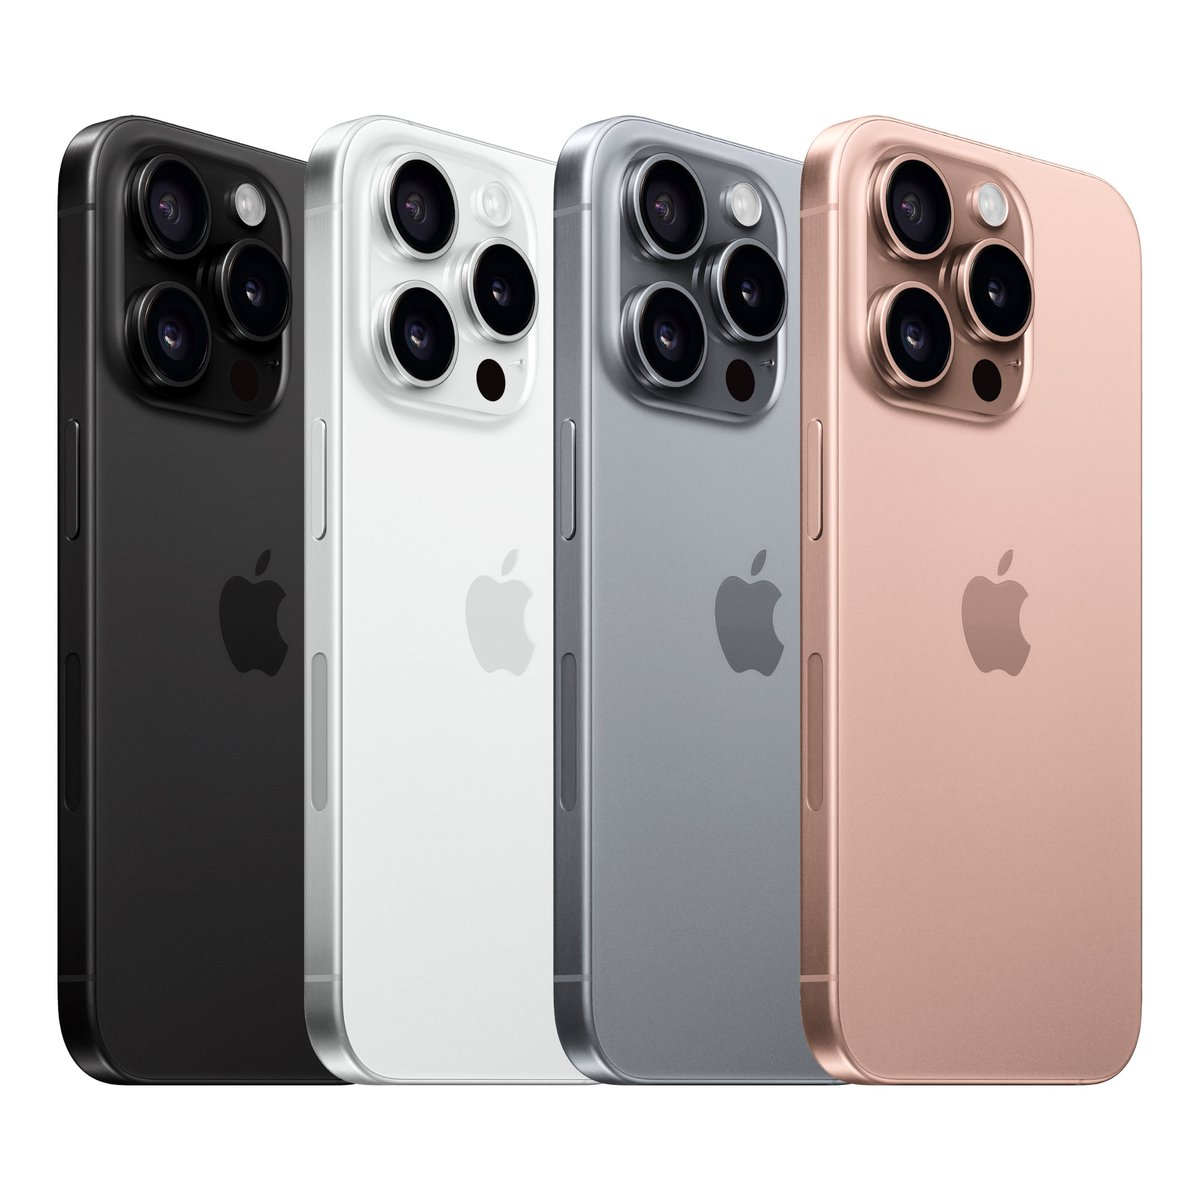 Rumors suggest the iPhone 16 Pro ditches blue for a new rose titanium color Which color do you prefer? - Black - White (or Silver) - Gray (or Natural Titanium) - Rose #Apple #iPhone #iPhone16Pro #iPhone16Series